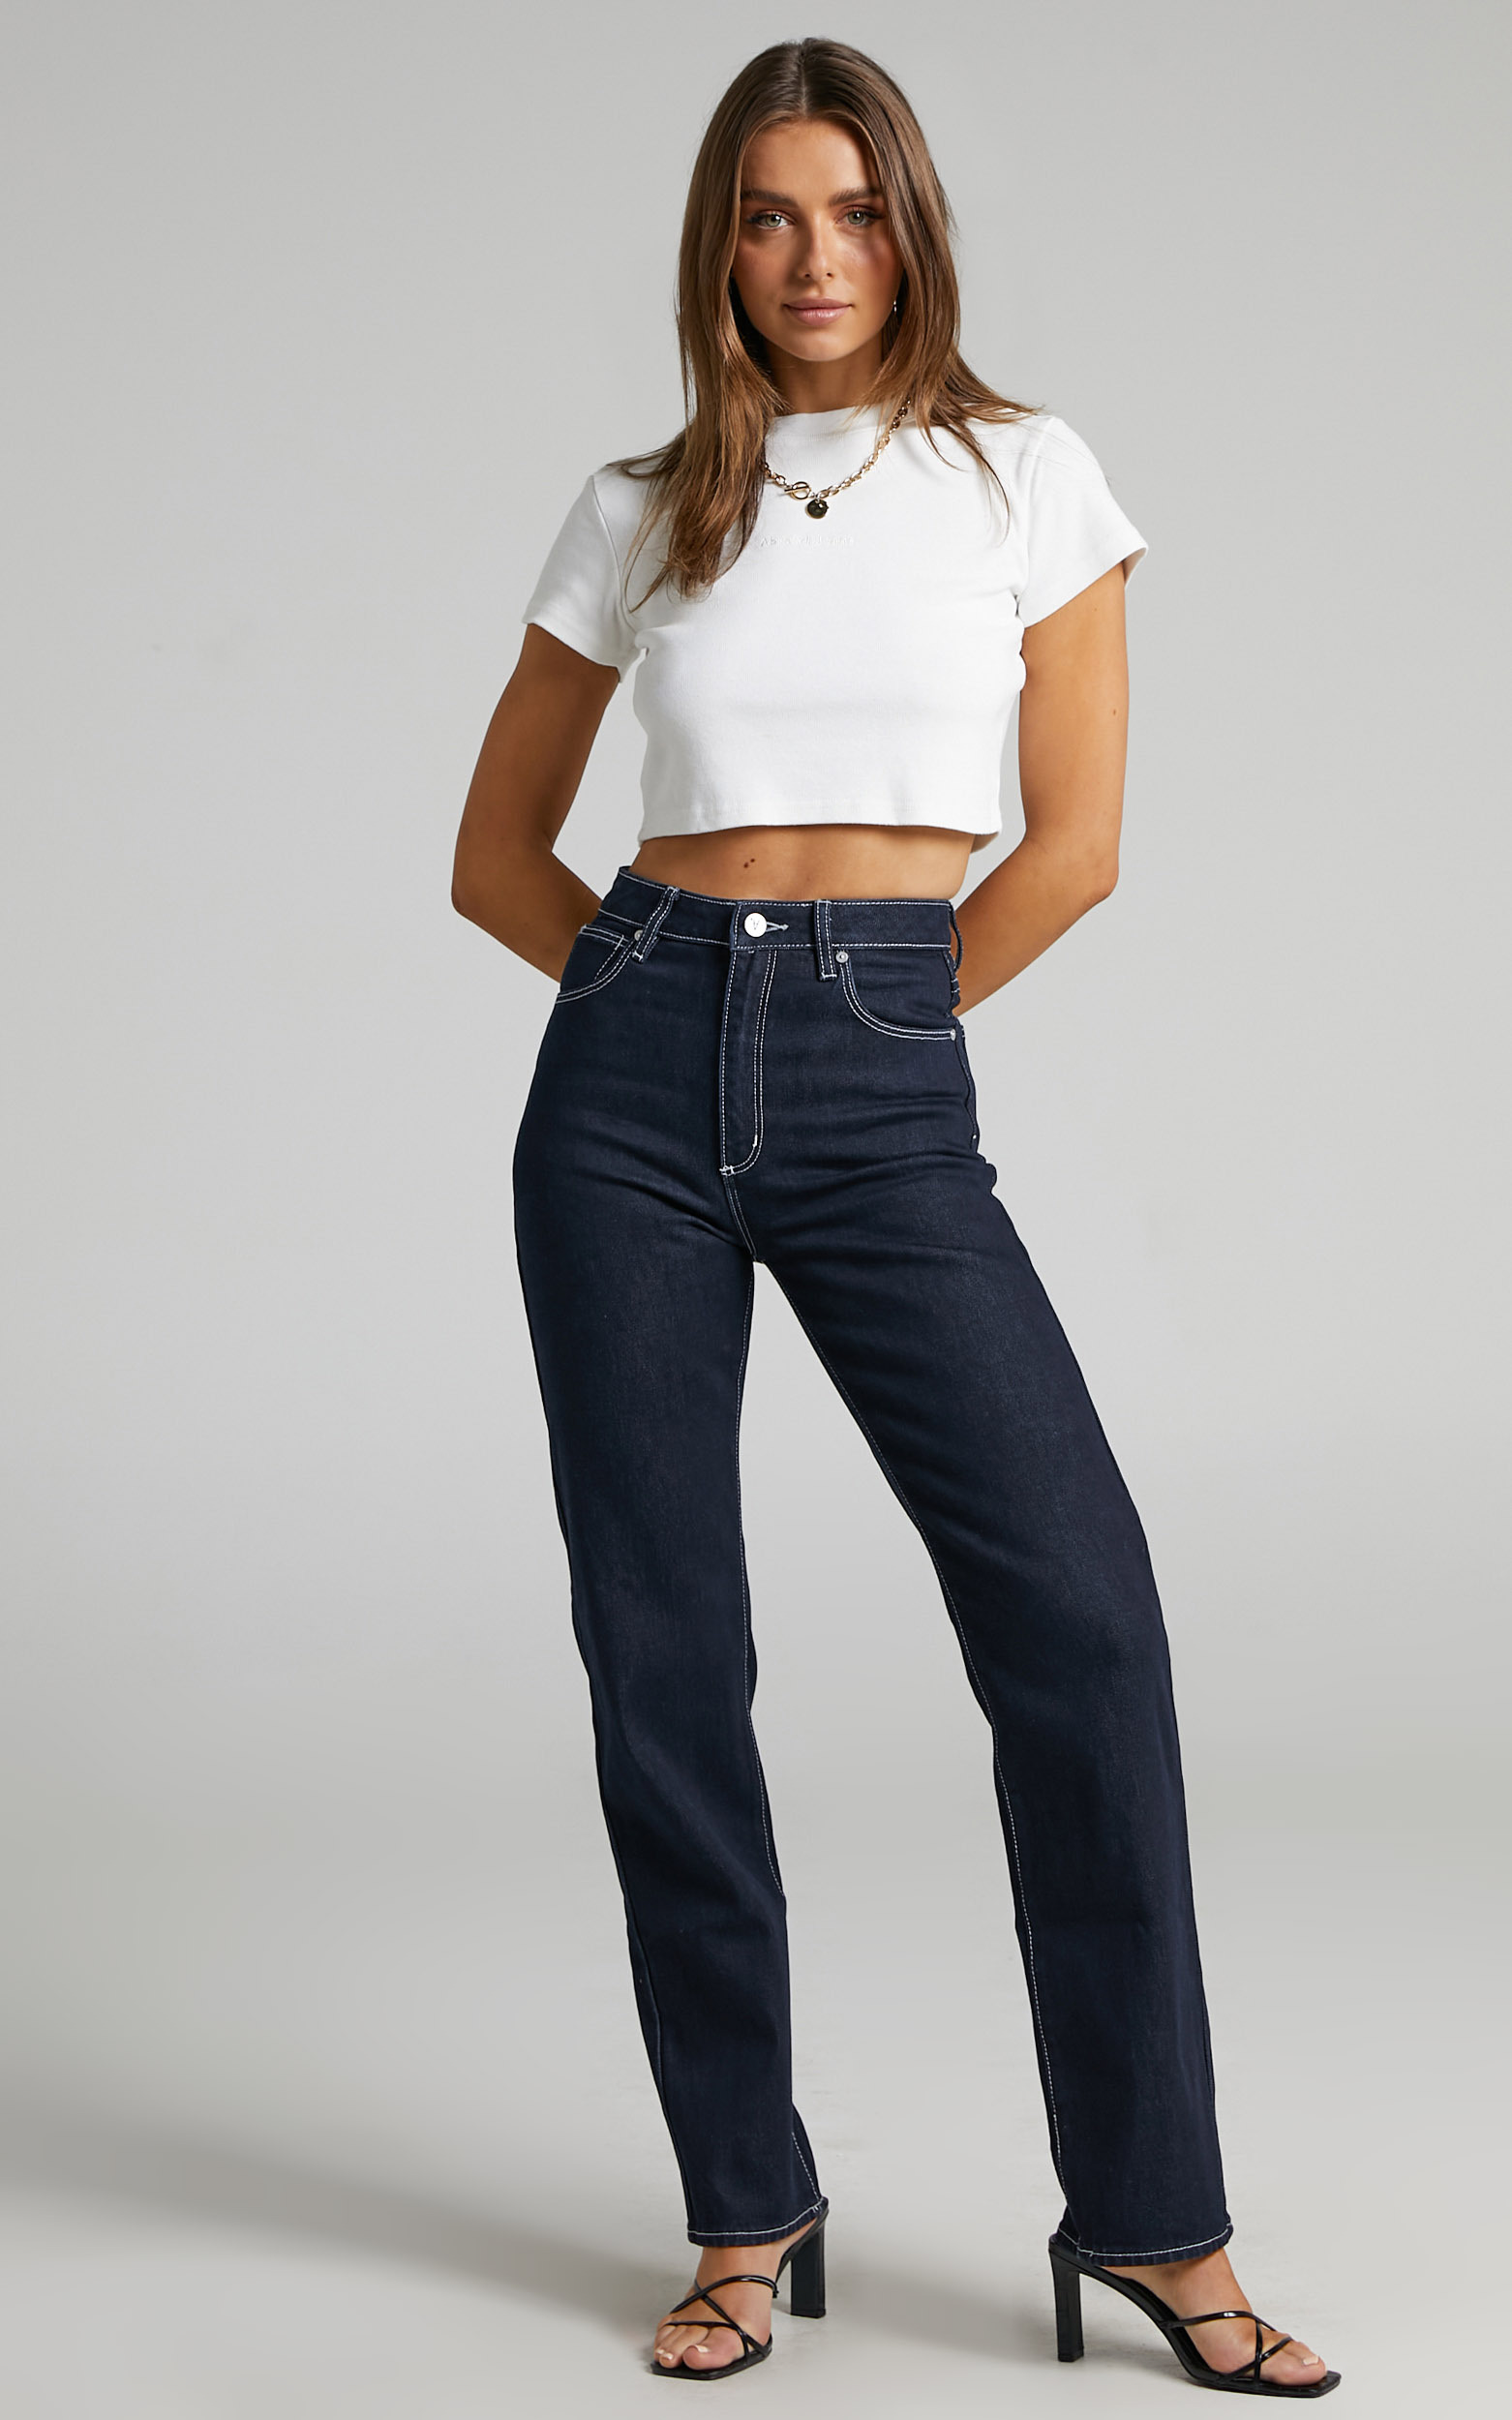 Abrand - A '94 High Straight Alice Jean in Rinse Denim - 06, BLU1, hi-res image number null